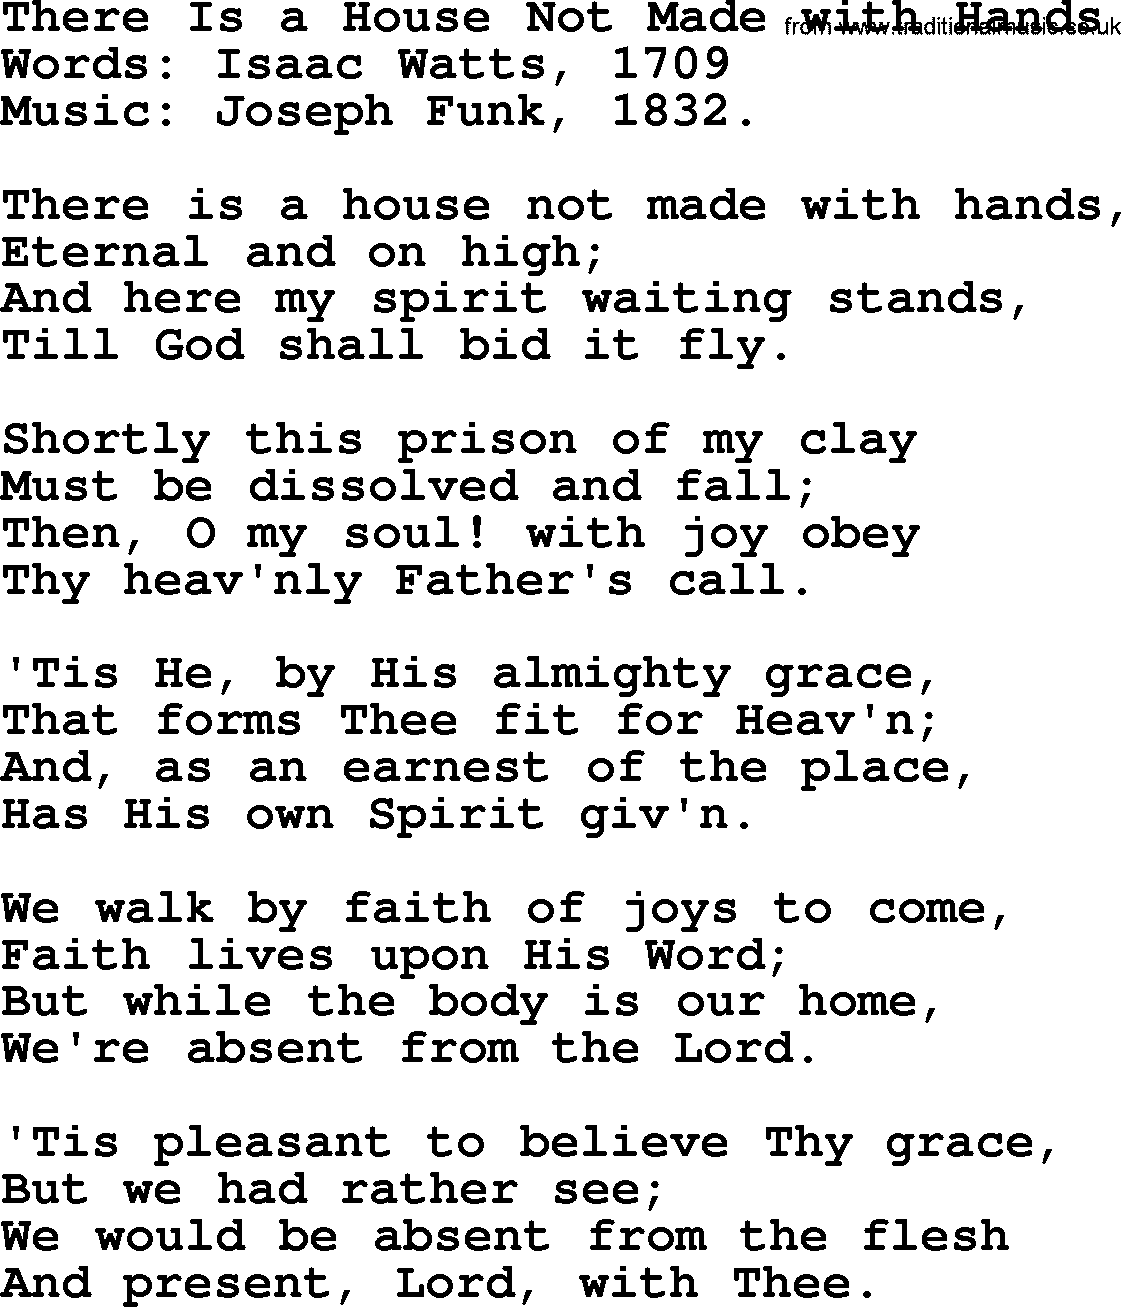 Songs and Hymns about Heaven: There Is A House Not Made With Hands lyrics with PDF